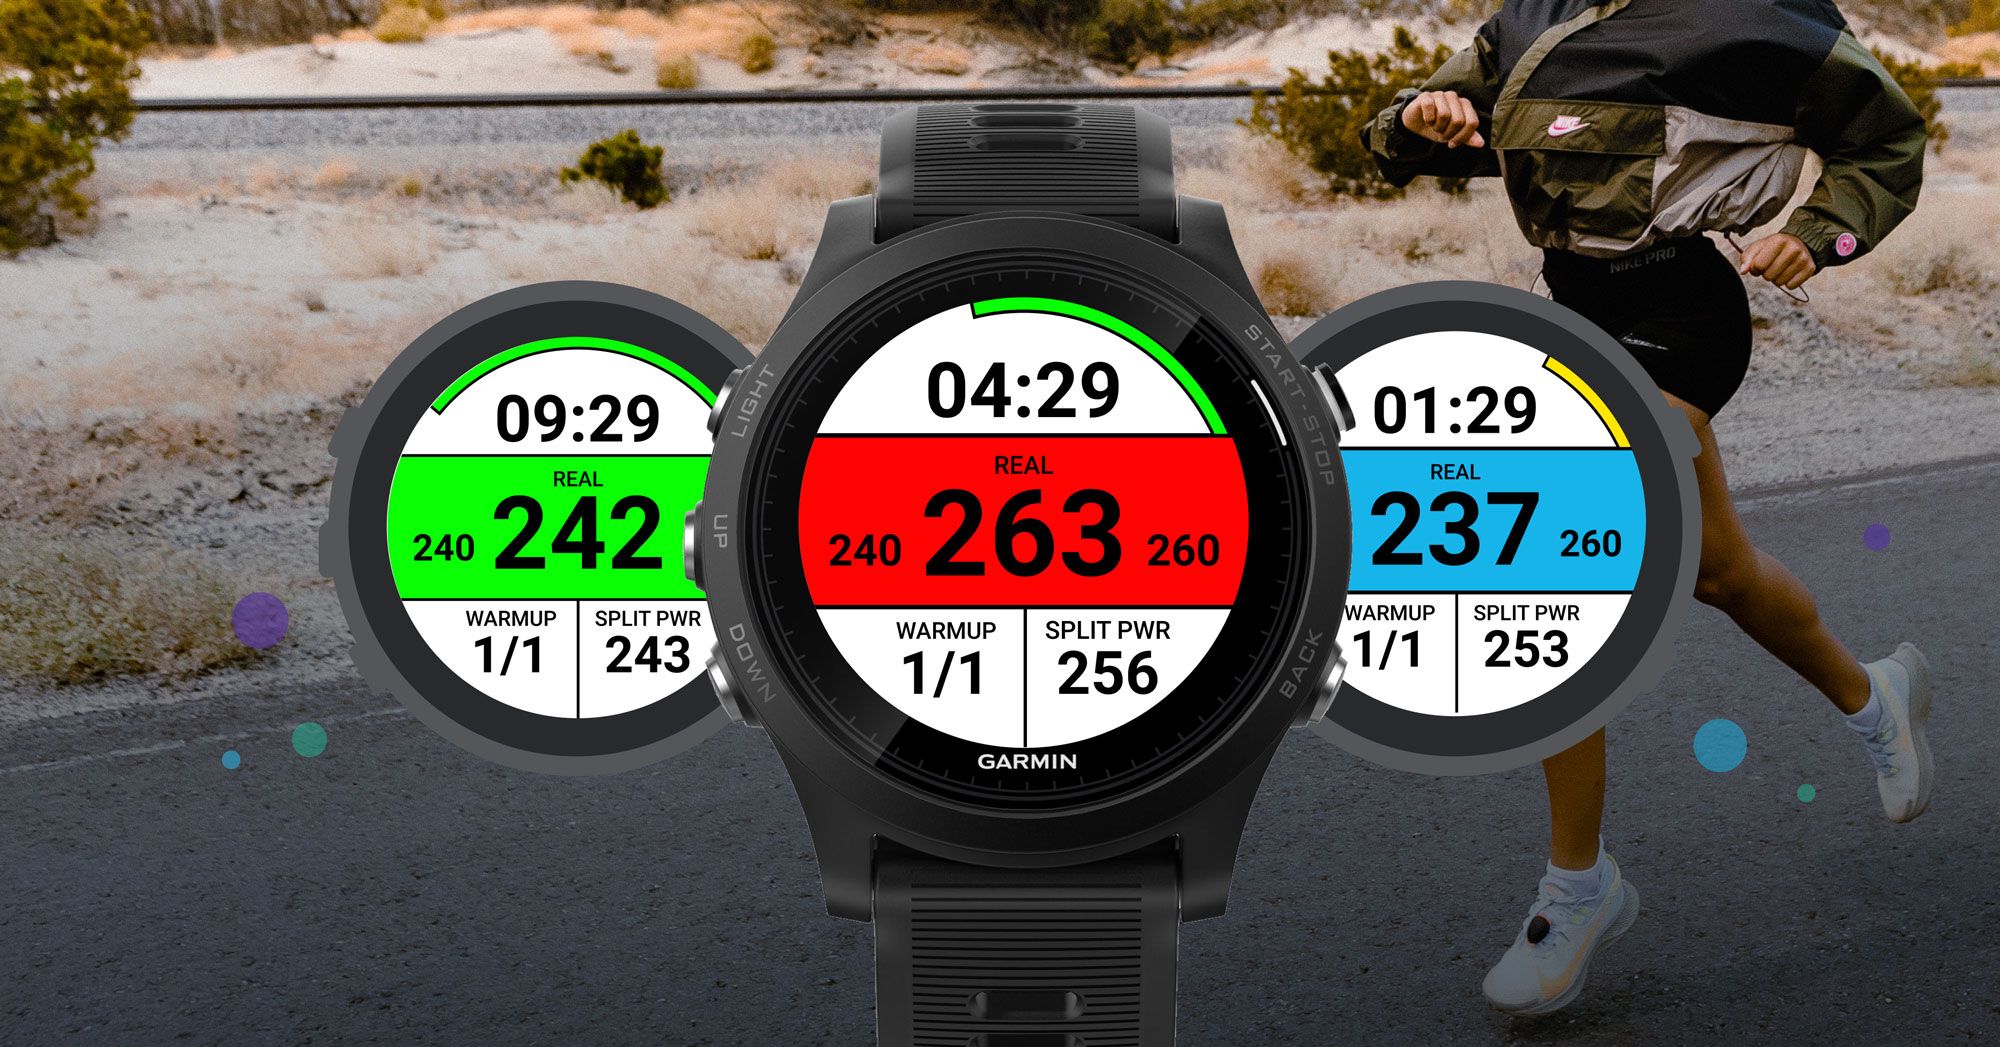 Presenting the easiest execute workouts on your Garmin watch | App Update